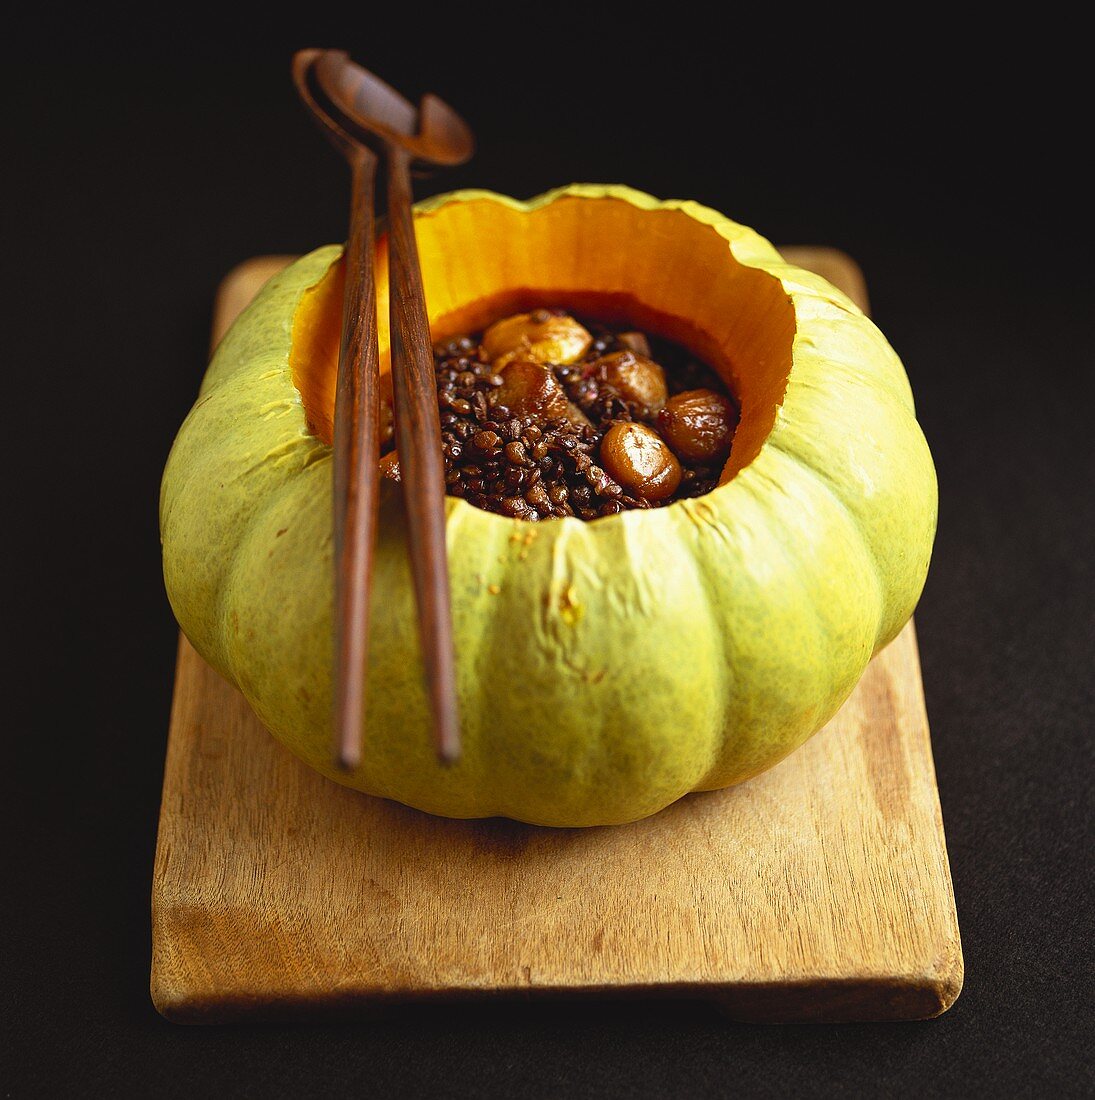 Pumpkin & lentil stew with chestnuts in hollowed-out pumpkin